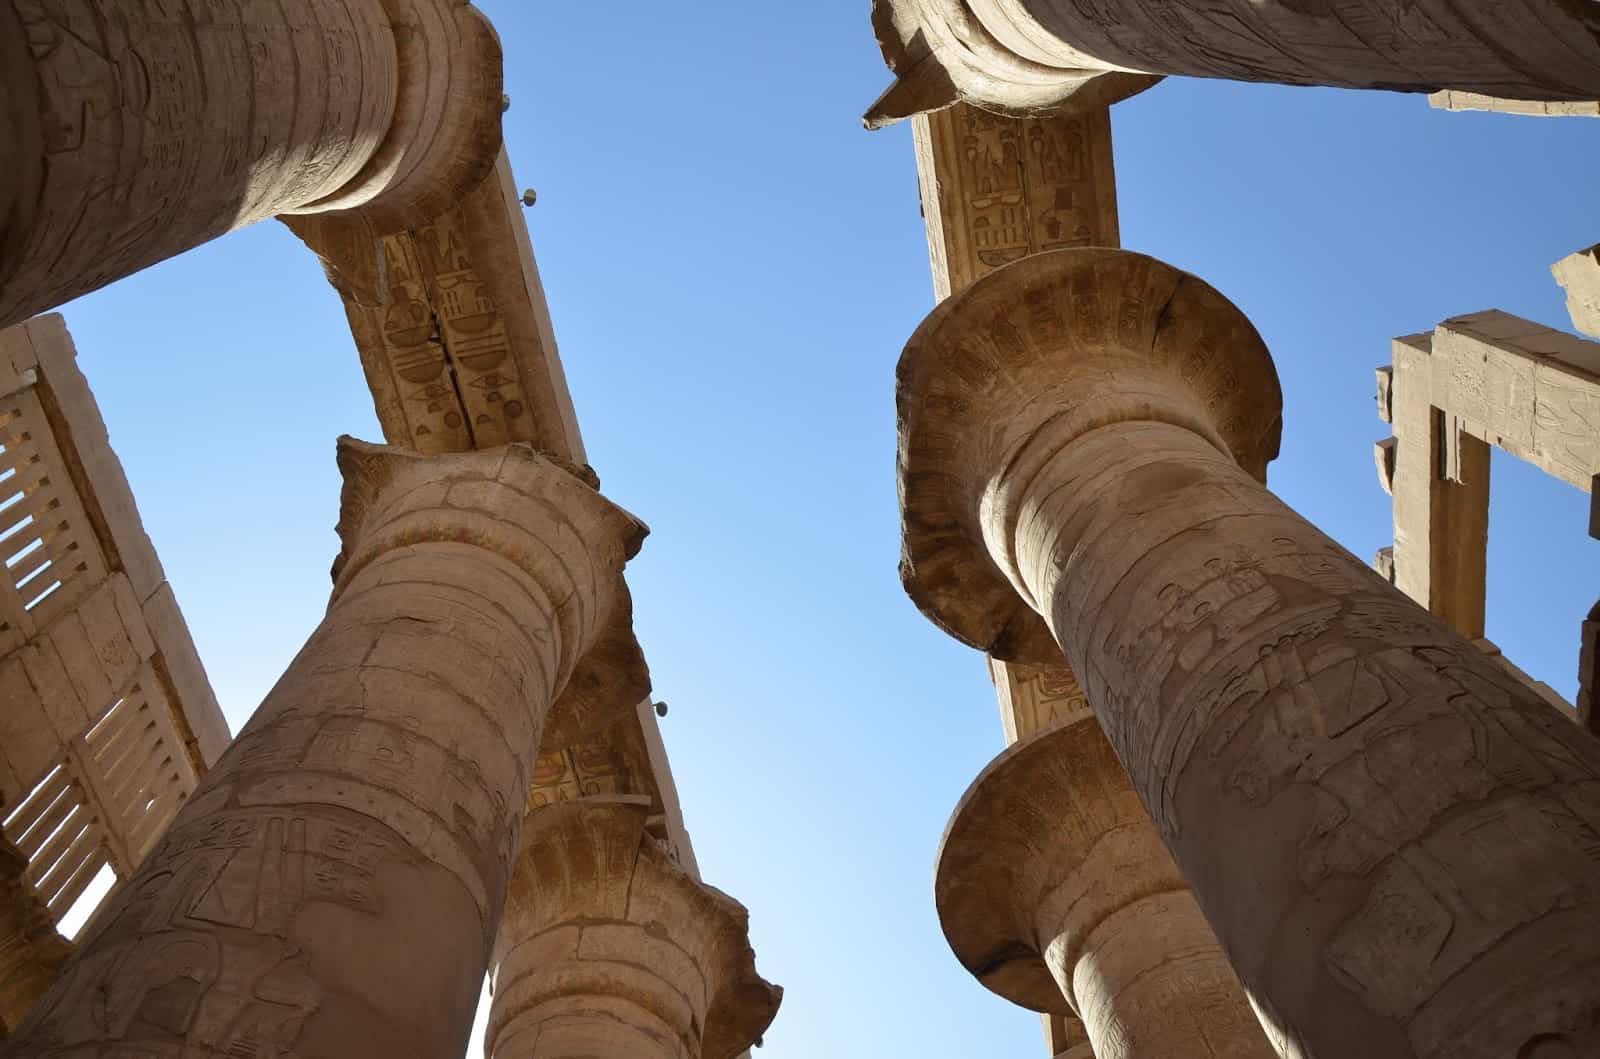 Looking up at the columns in the Hypostyle Hall